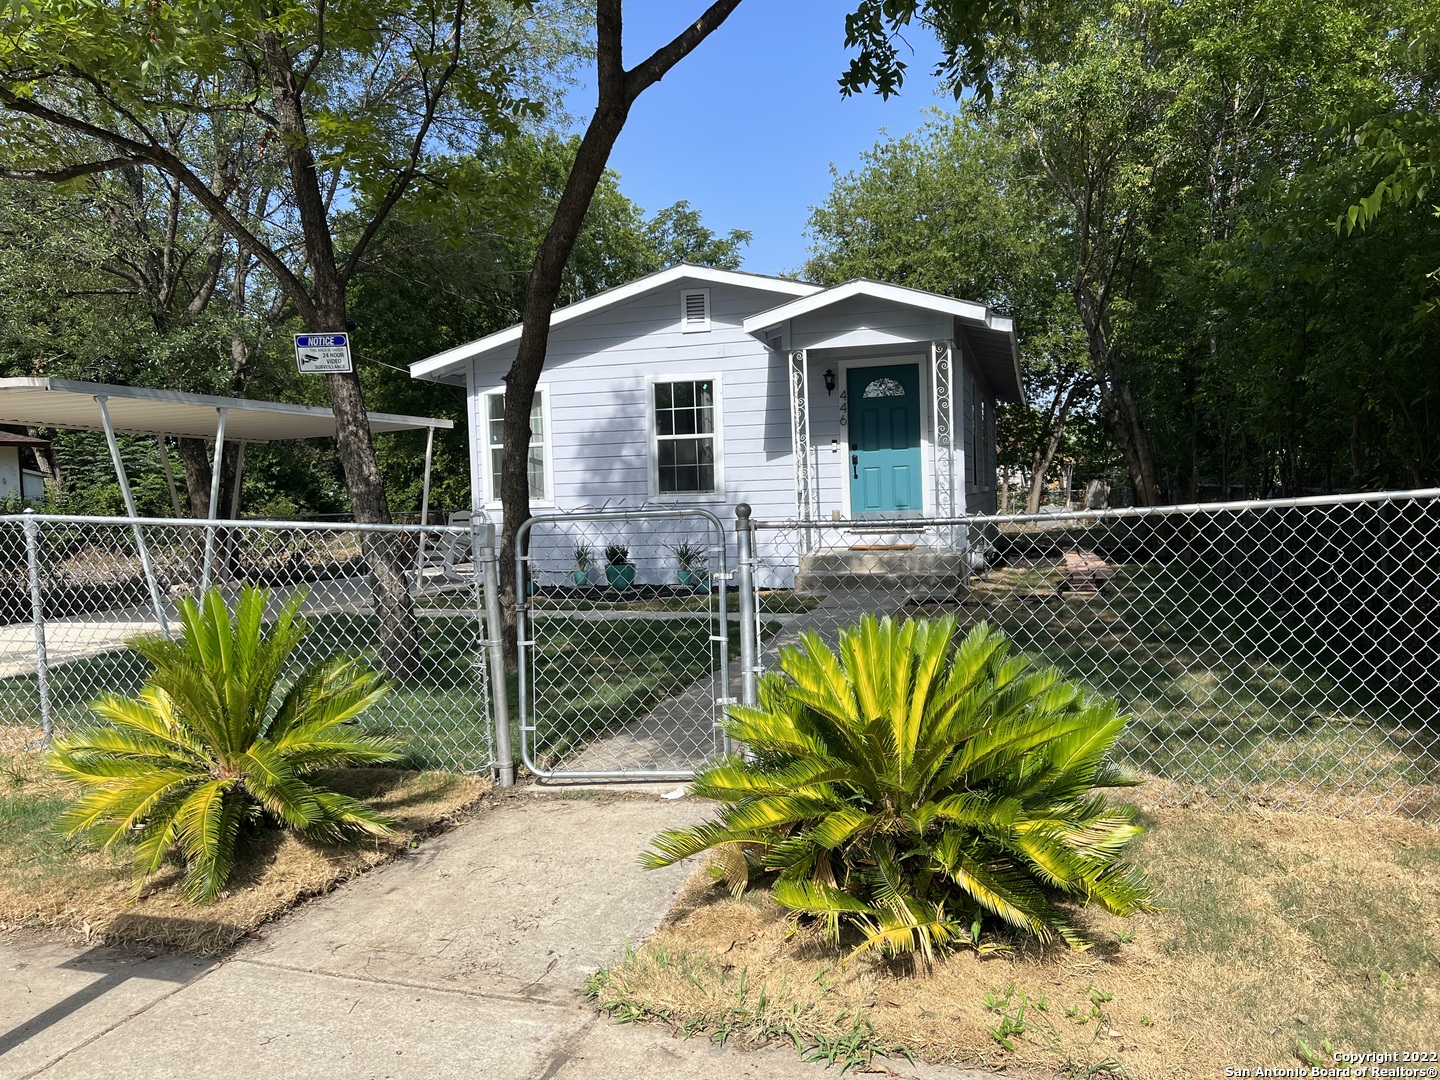 OPEN HOUSE 07/30/2022 12PM-4PM !!!!!!!!!!!Come see this beautifully updated gem. EVERYTHING has been updated from the foundation up. New HVAC system, NEW appliances, fresh paint, beautiful landscaping, and the perfect size backyard. This house would make the perfect starter home or rental!